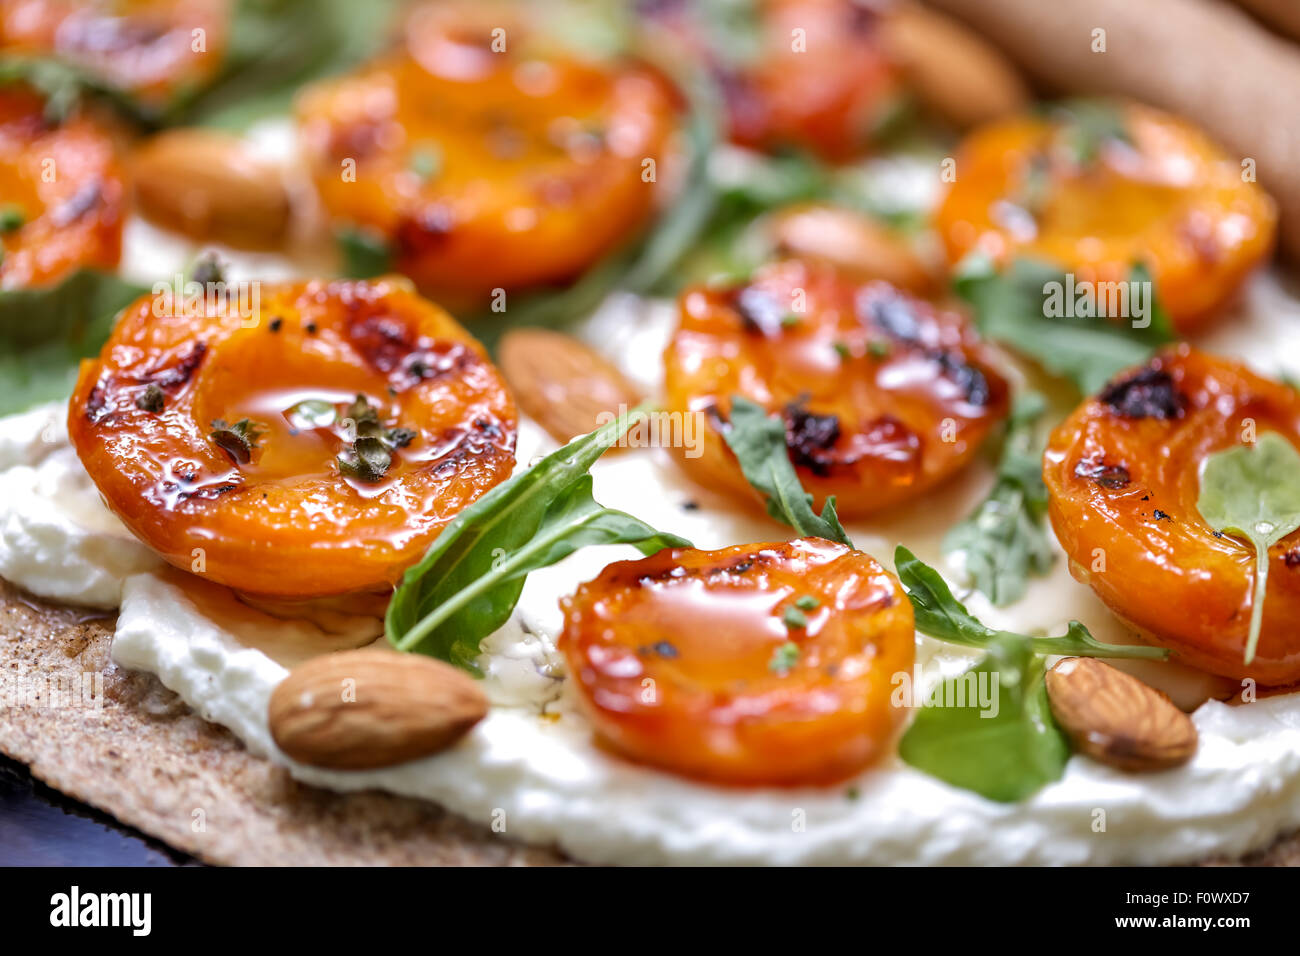 Grilled apricots and cream cheese sandwich Stock Photo